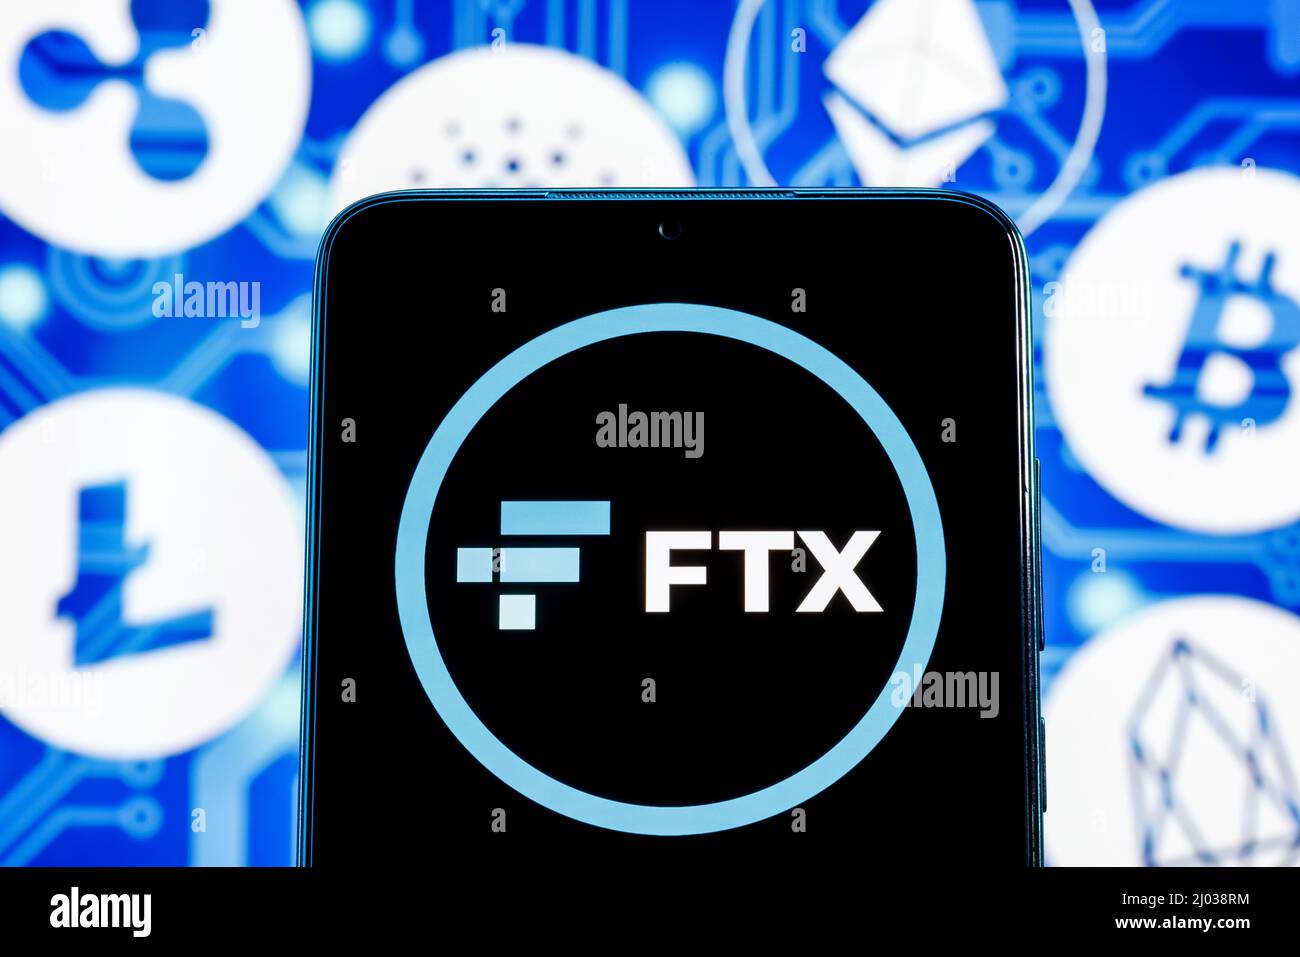 FTX is a cryptocurrency exchange. FTX logo on smartphone screen against the background of the main cryptocurrencies. Stock Photo